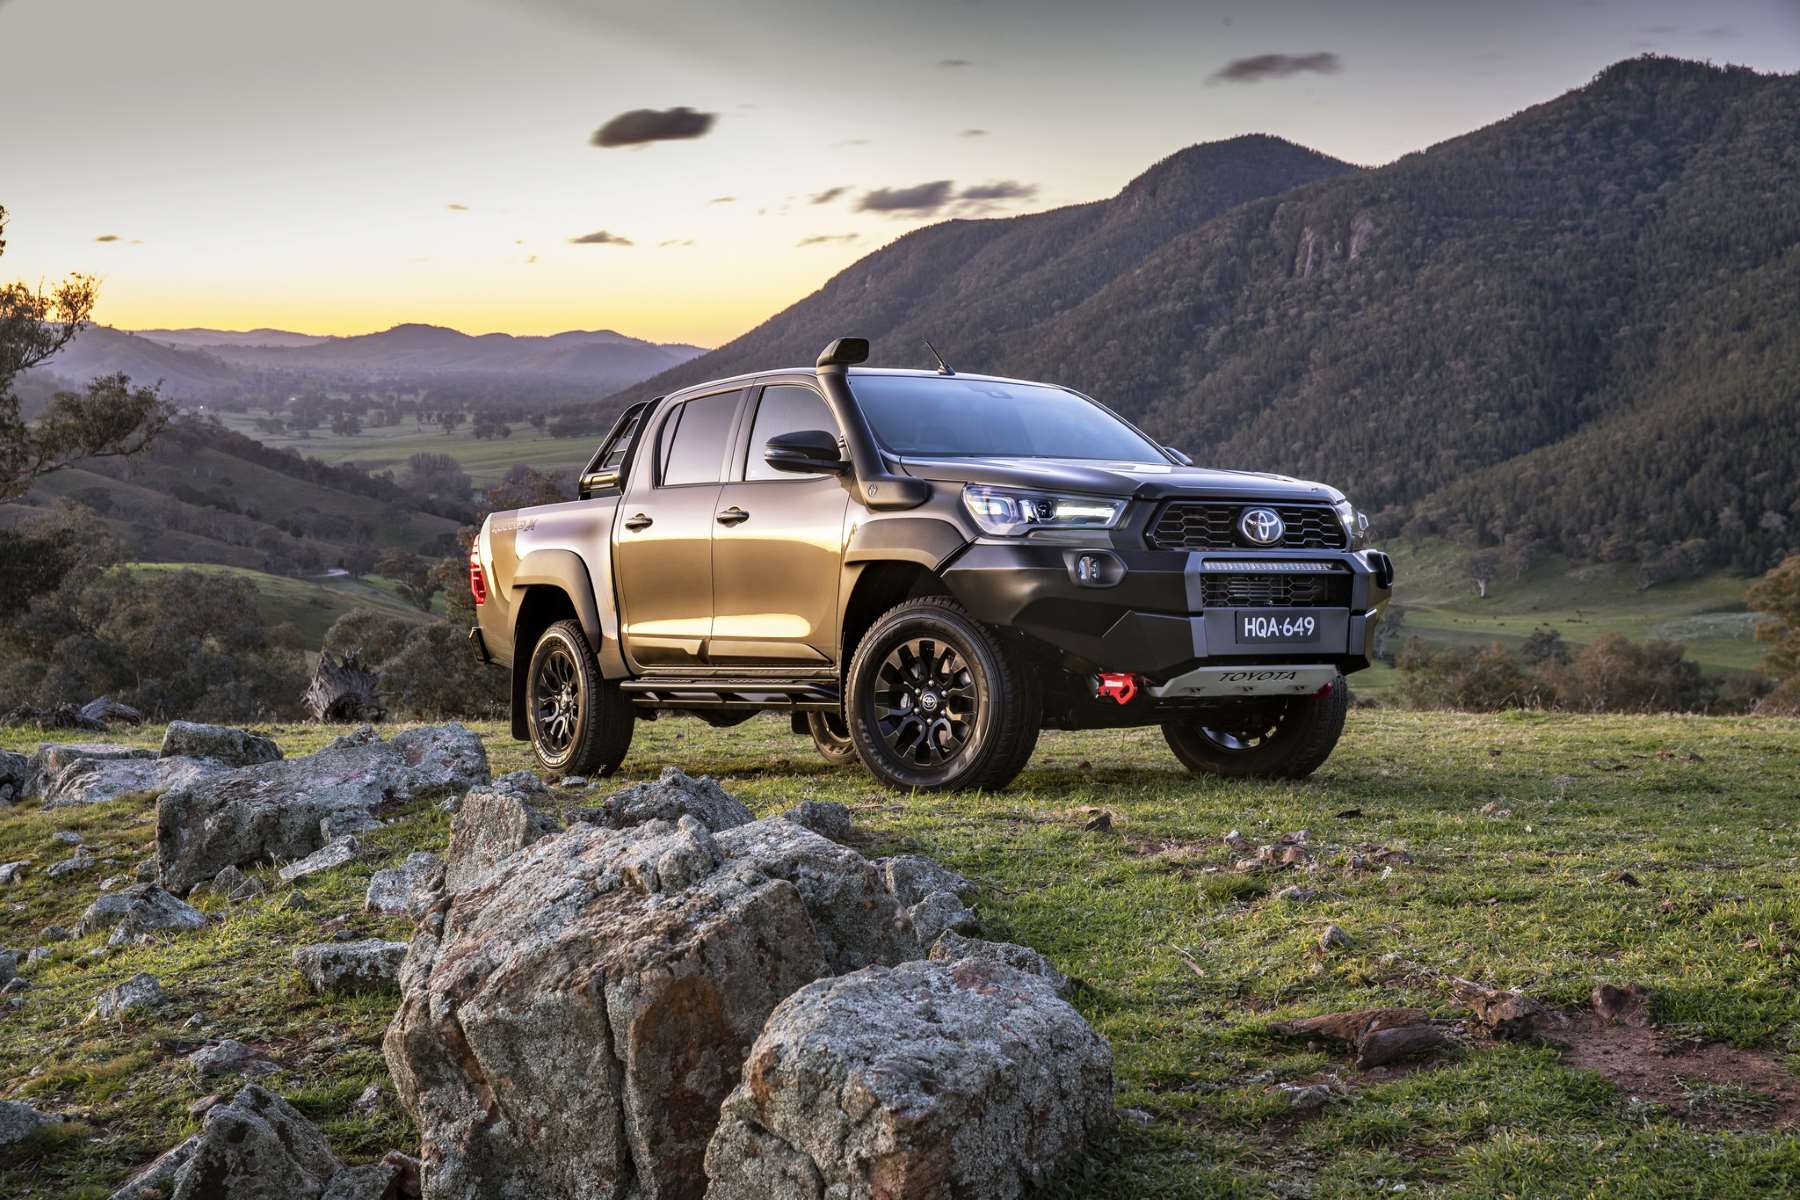 Discover The Surprising Solution To Stop Your 4x4 Ute From Sliding On Your Painted Driveway!